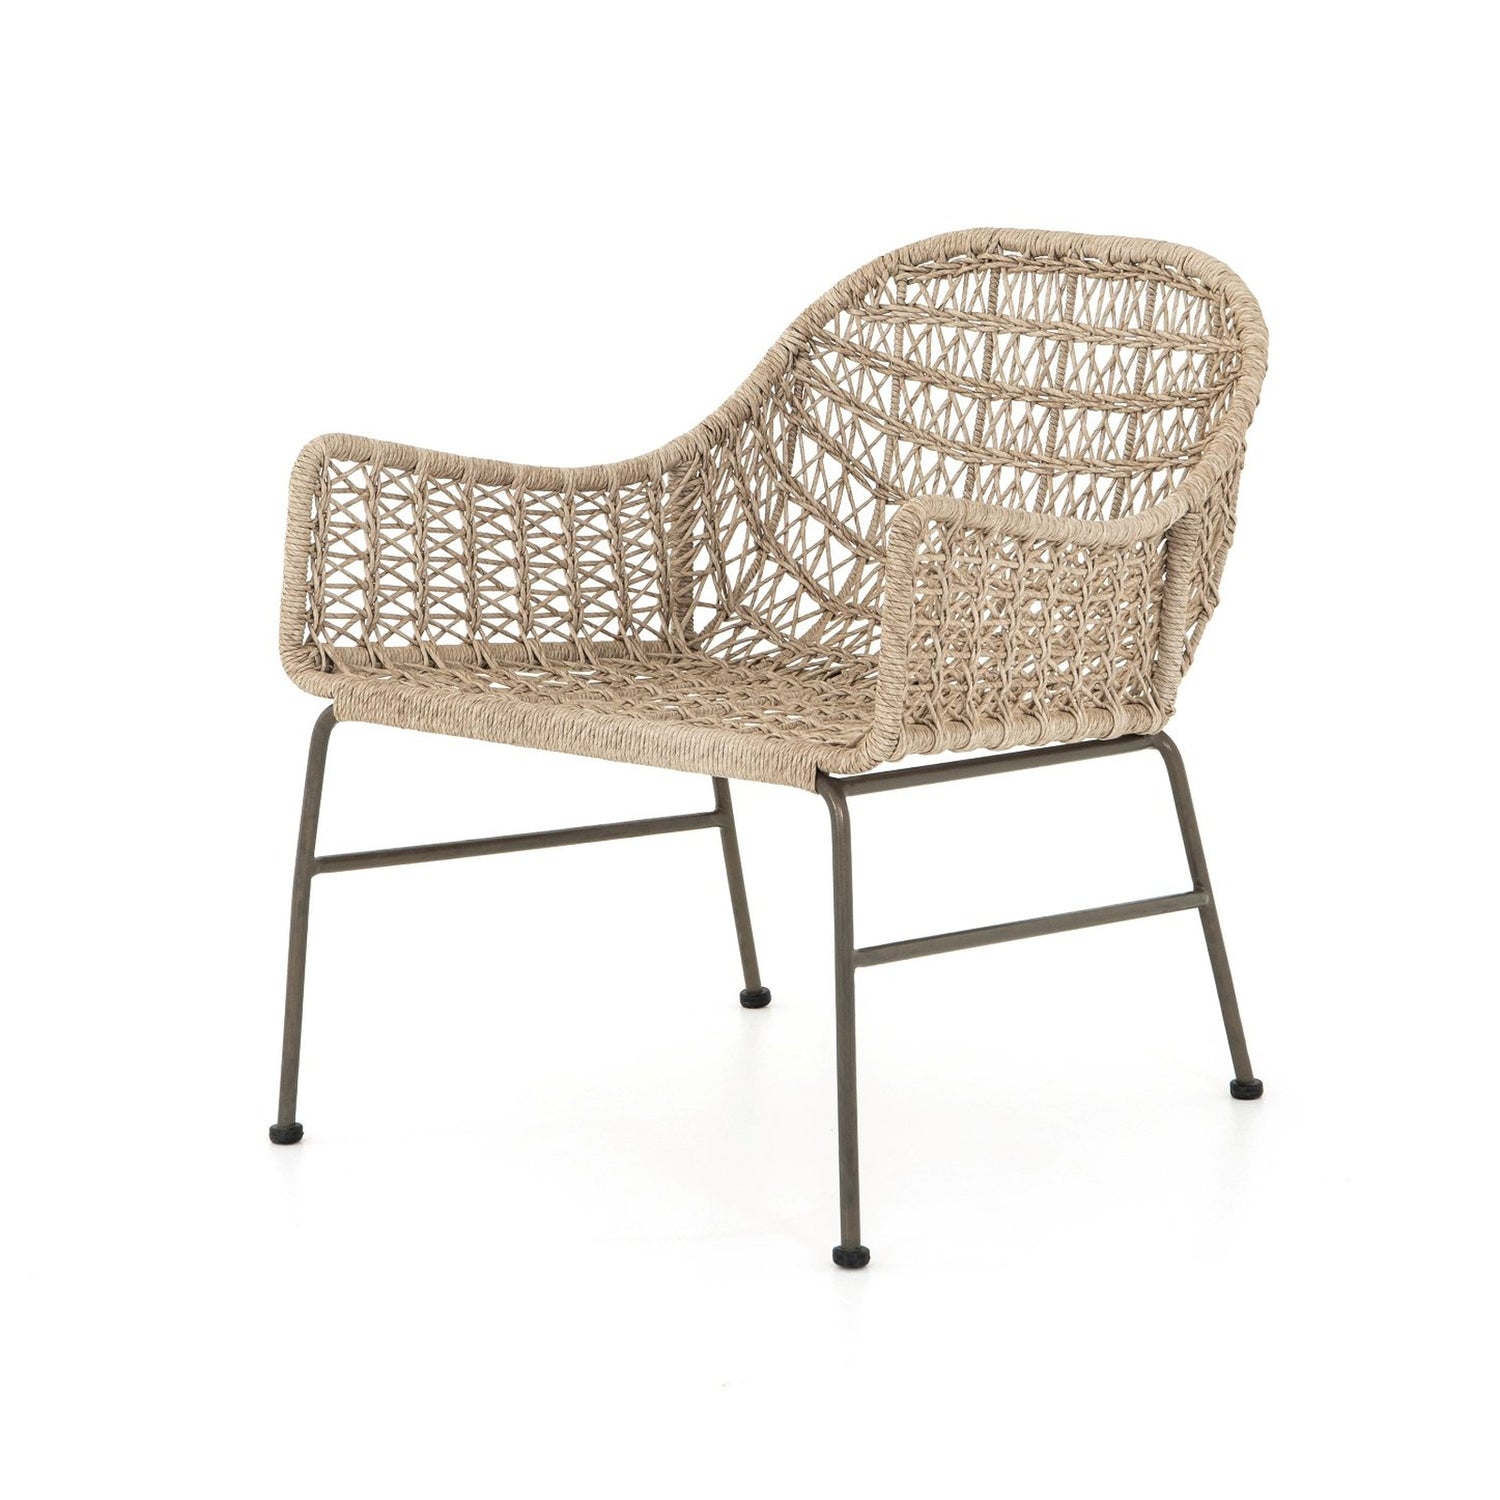 Four Hands Bandera Outdoor Woven Club Chair Grayson Living